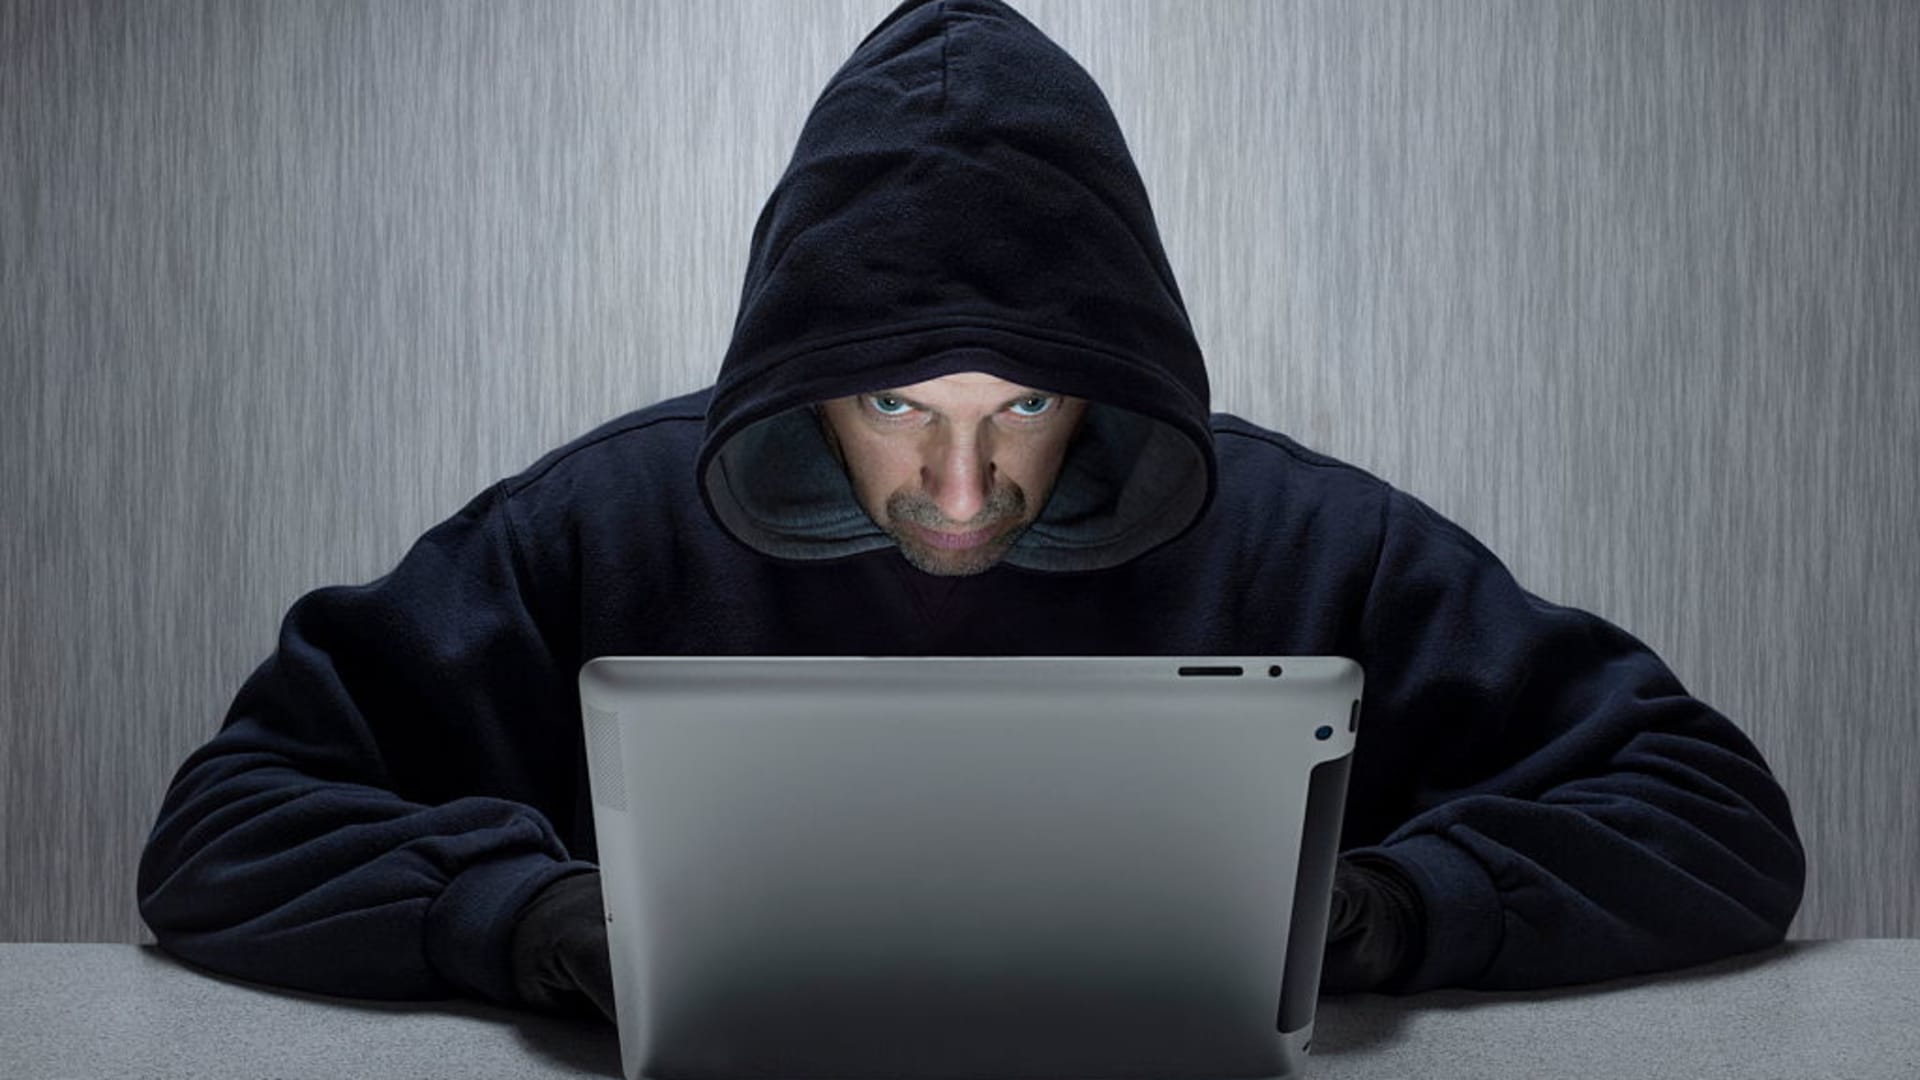 A hooded man representing a cyber criminal.